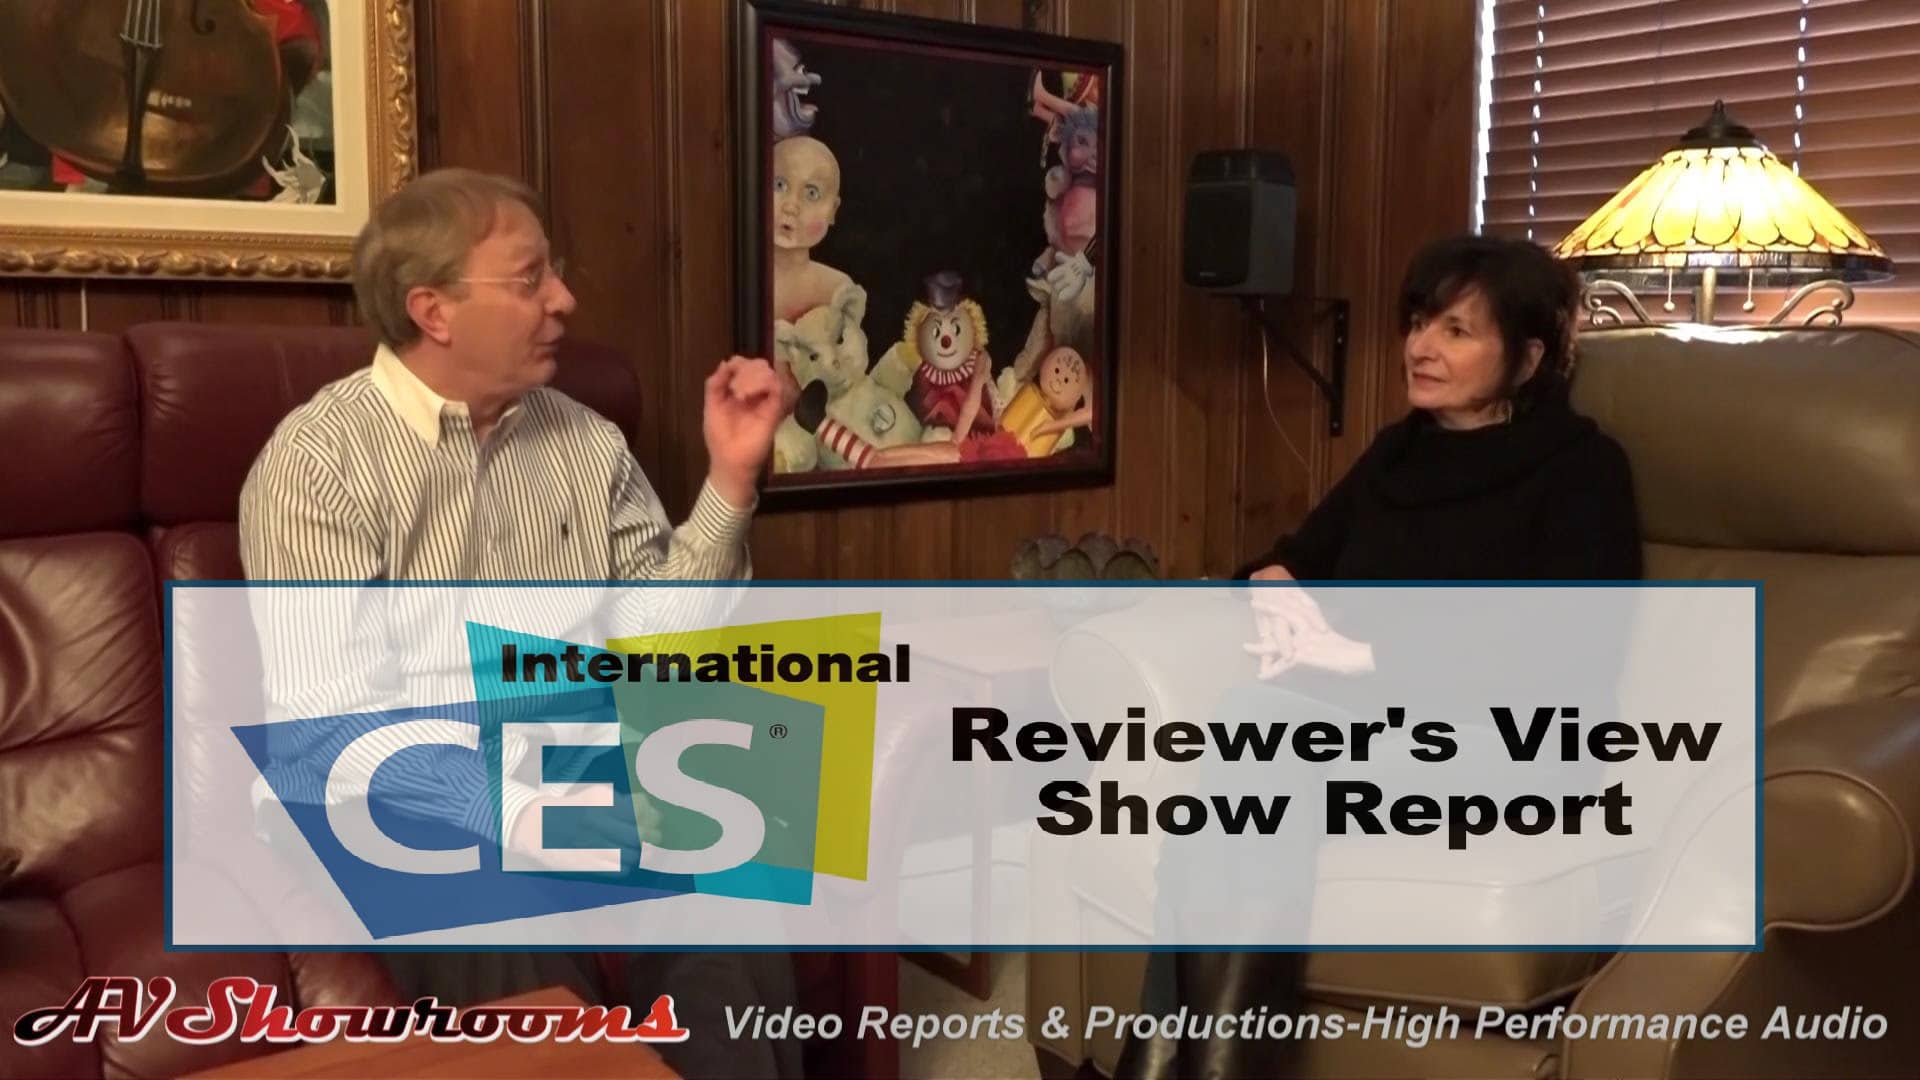 Reviewers View CES 2015 Show Report, high end audio exhibits – YouTube